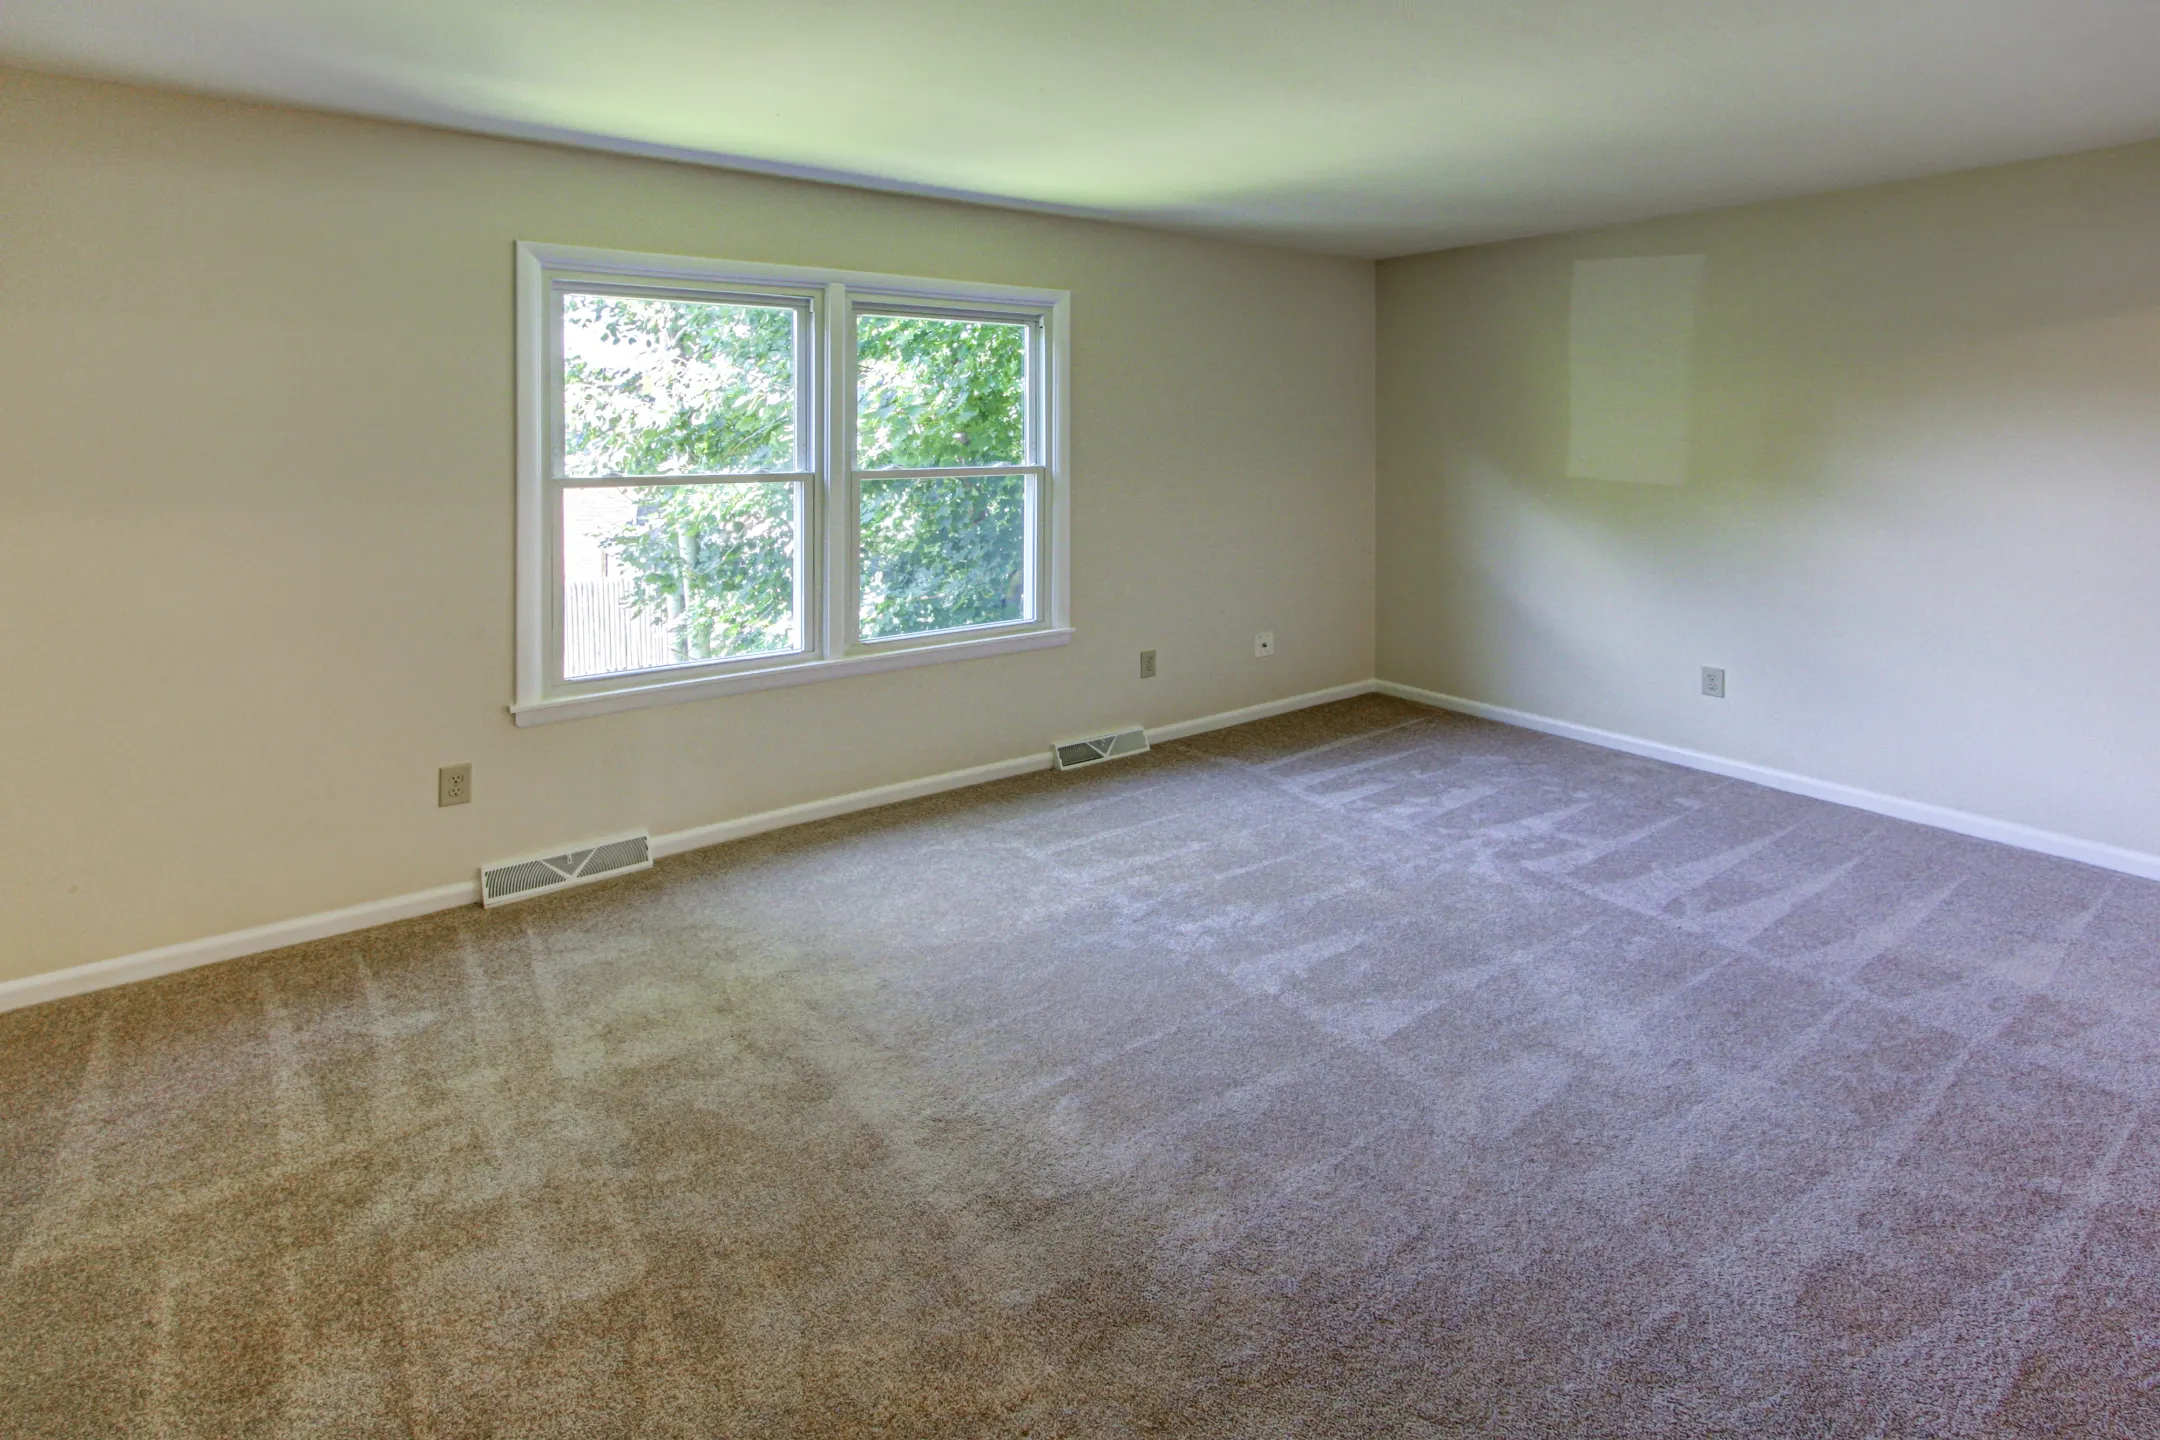 Living Room - Presidential Townhome Rentals - Guilderland, NY